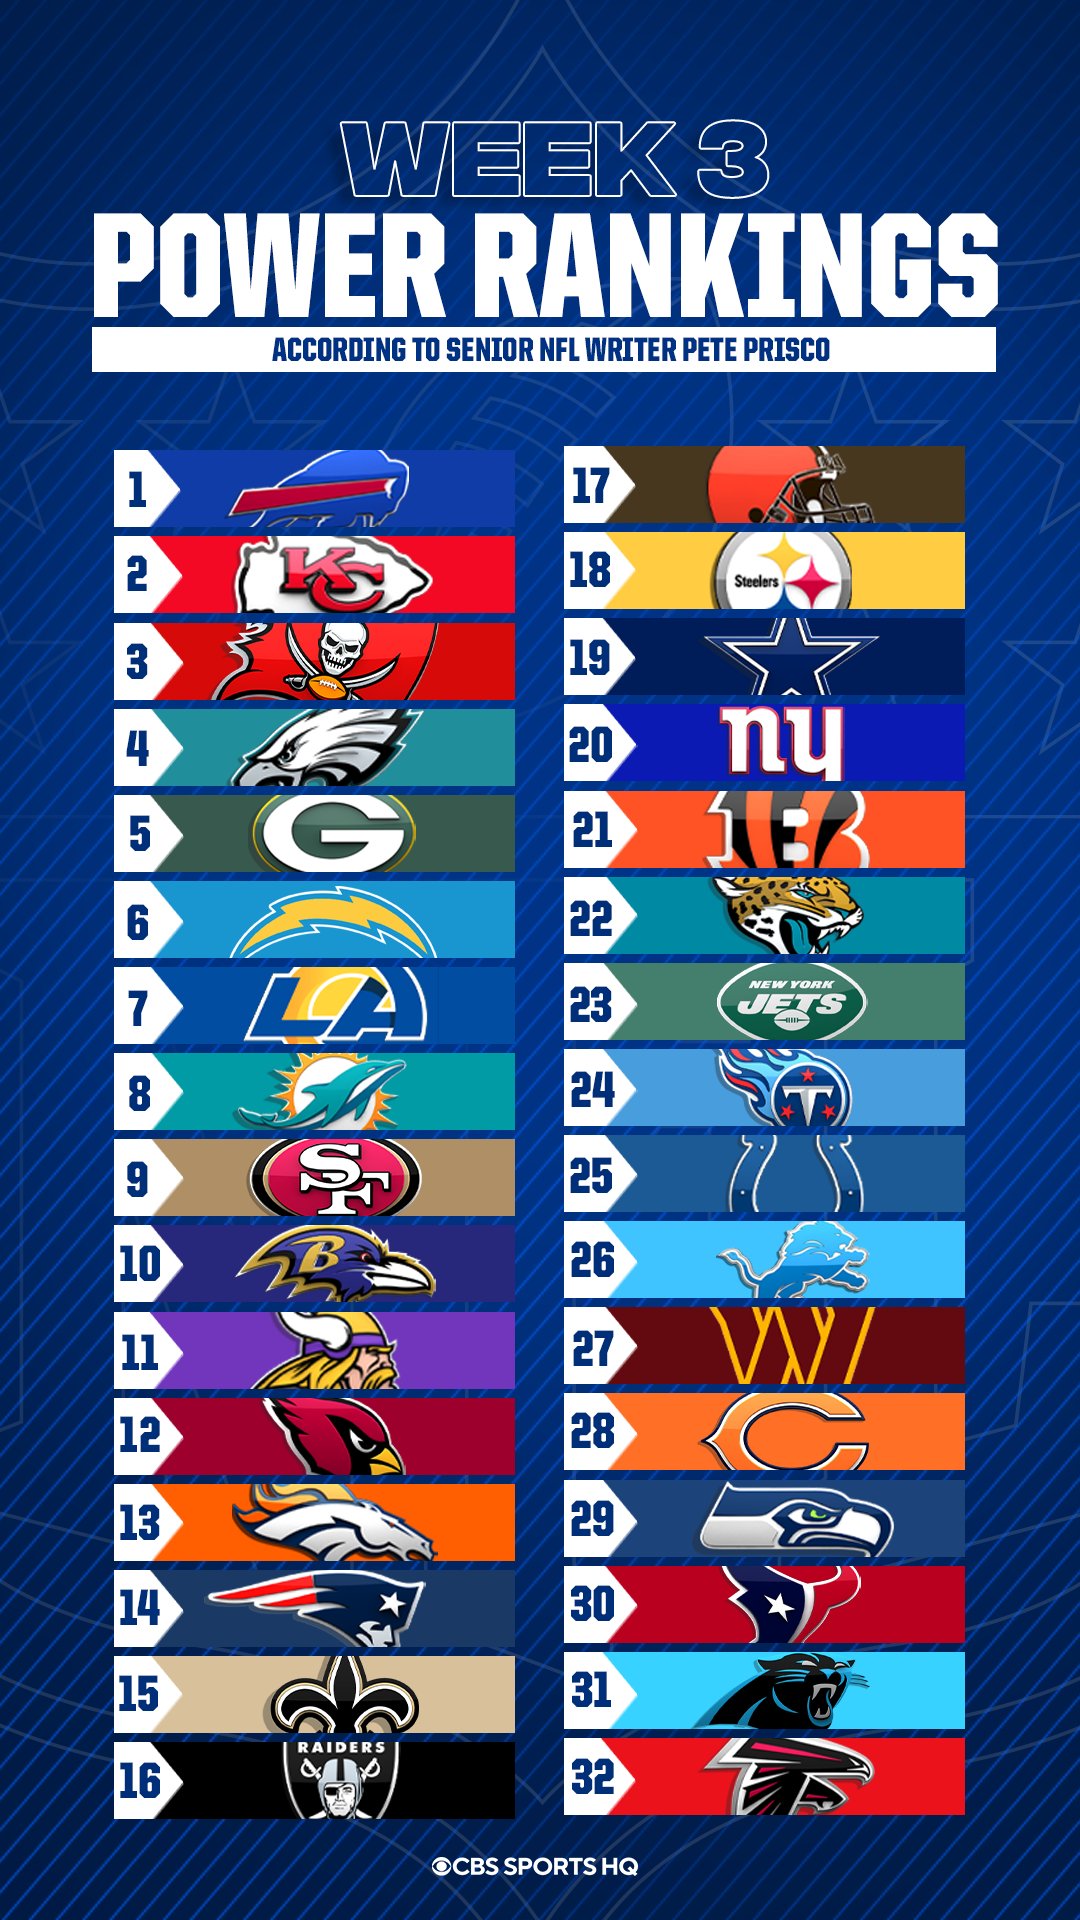 CBS Sports HQ on X: 'NFL WEEK 3 POWER RANKINGS ⬇️ (Via @PriscoCBS) 1. Bills  2. Chiefs 3. Buccaneers 4. Eagles 5. Packers 6. Chargers 7. Rams 8.  Dolphins 9. 49ers 10. Ravens Thoughts?  / X